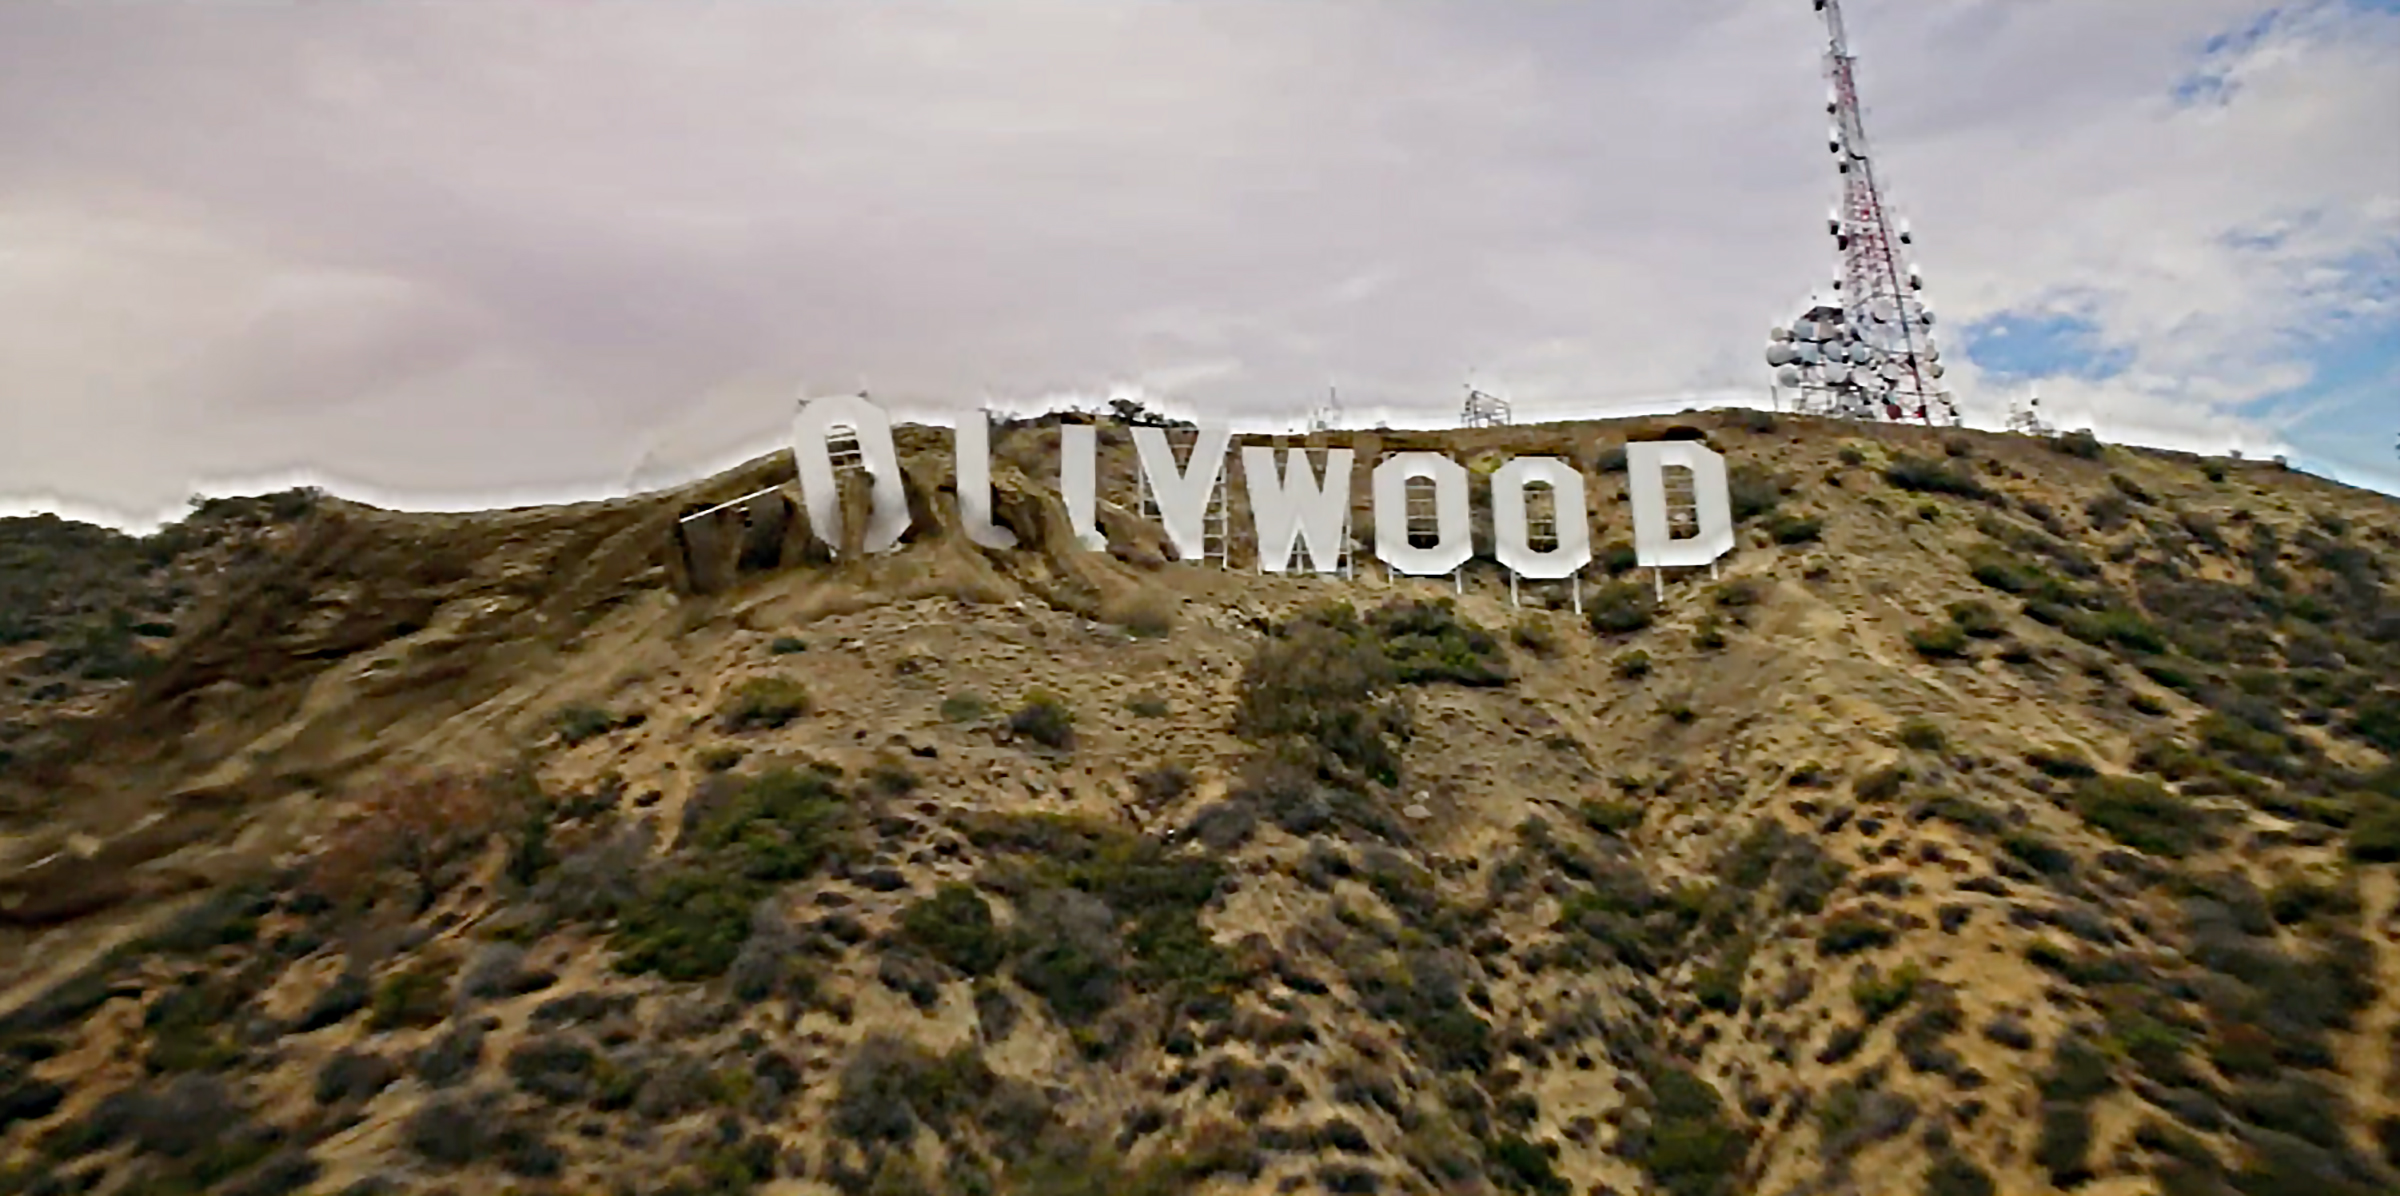 The iconic Hollywood sign crumbles in the Jan. 18, 2021, season premiere episode of 9-1-1. (FOX)